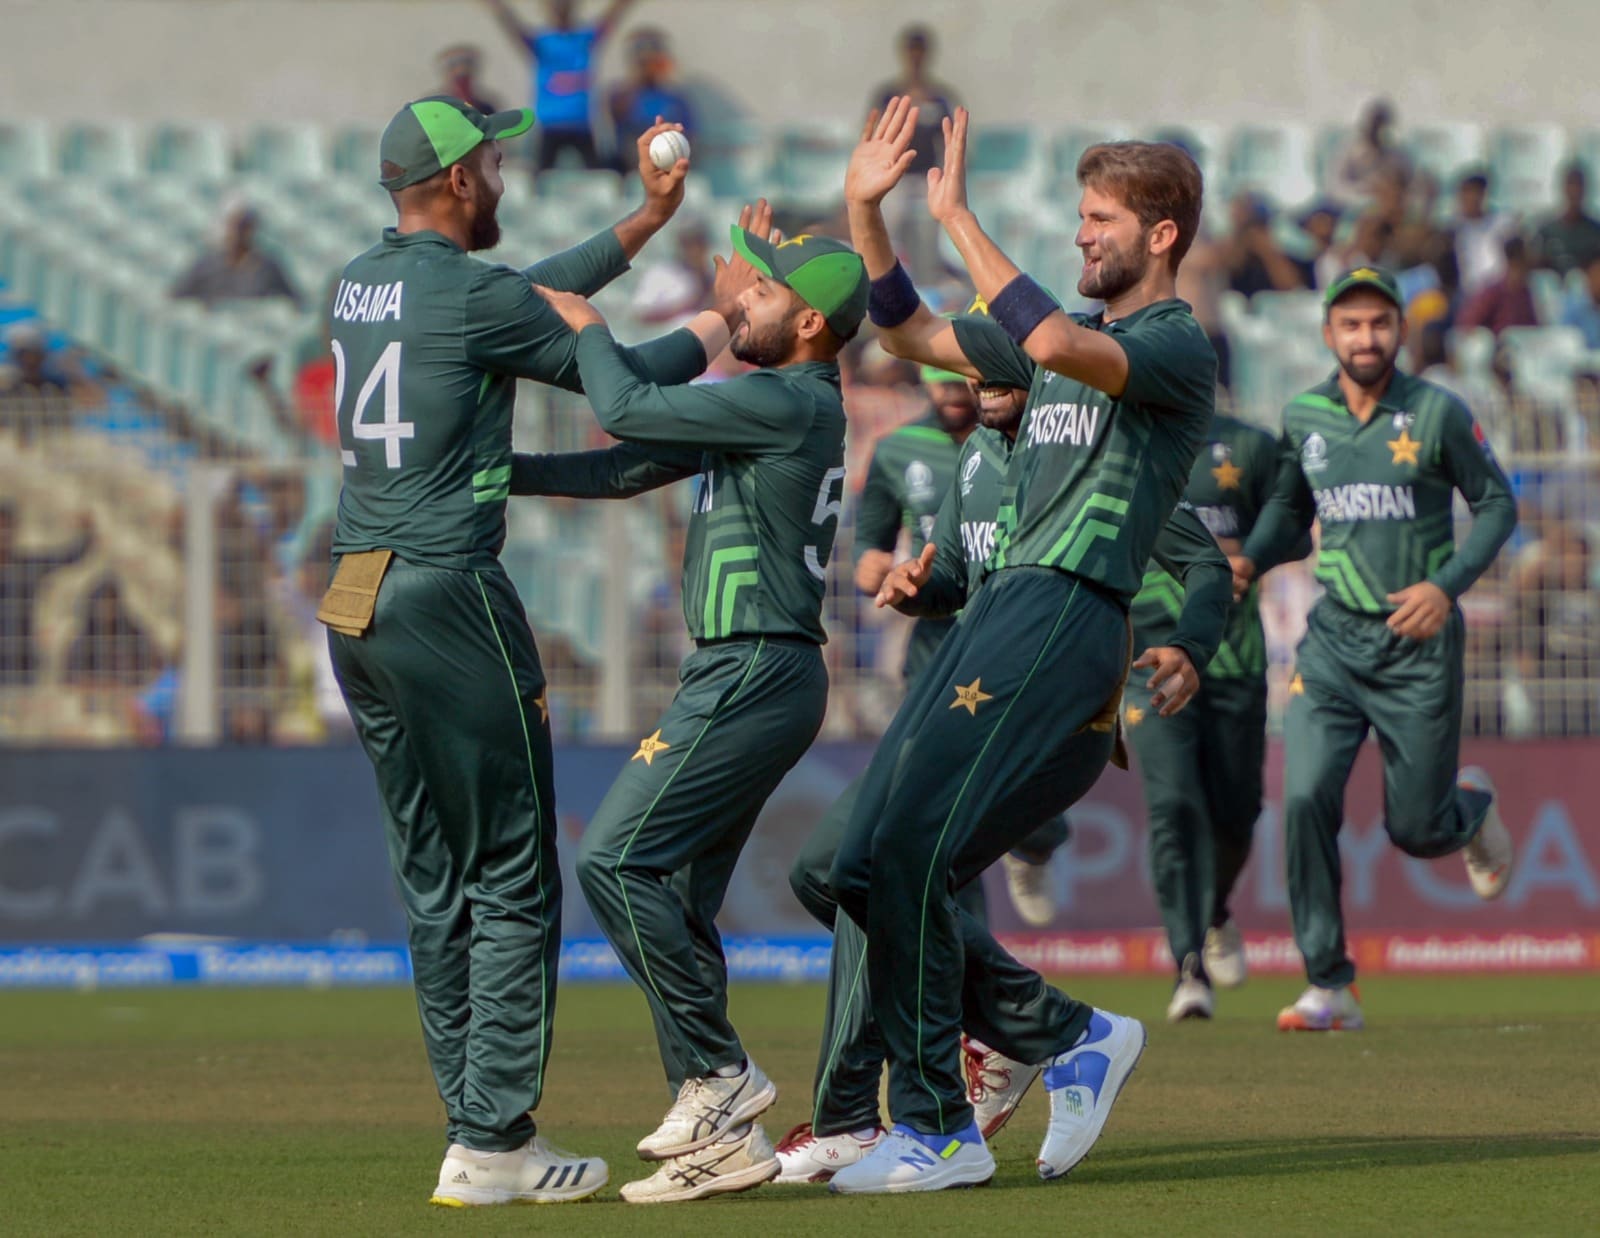 Shaheen Afridi Sets World Record With Fiery Spell In Cricket World Cup Match vs Bangladesh. Watch